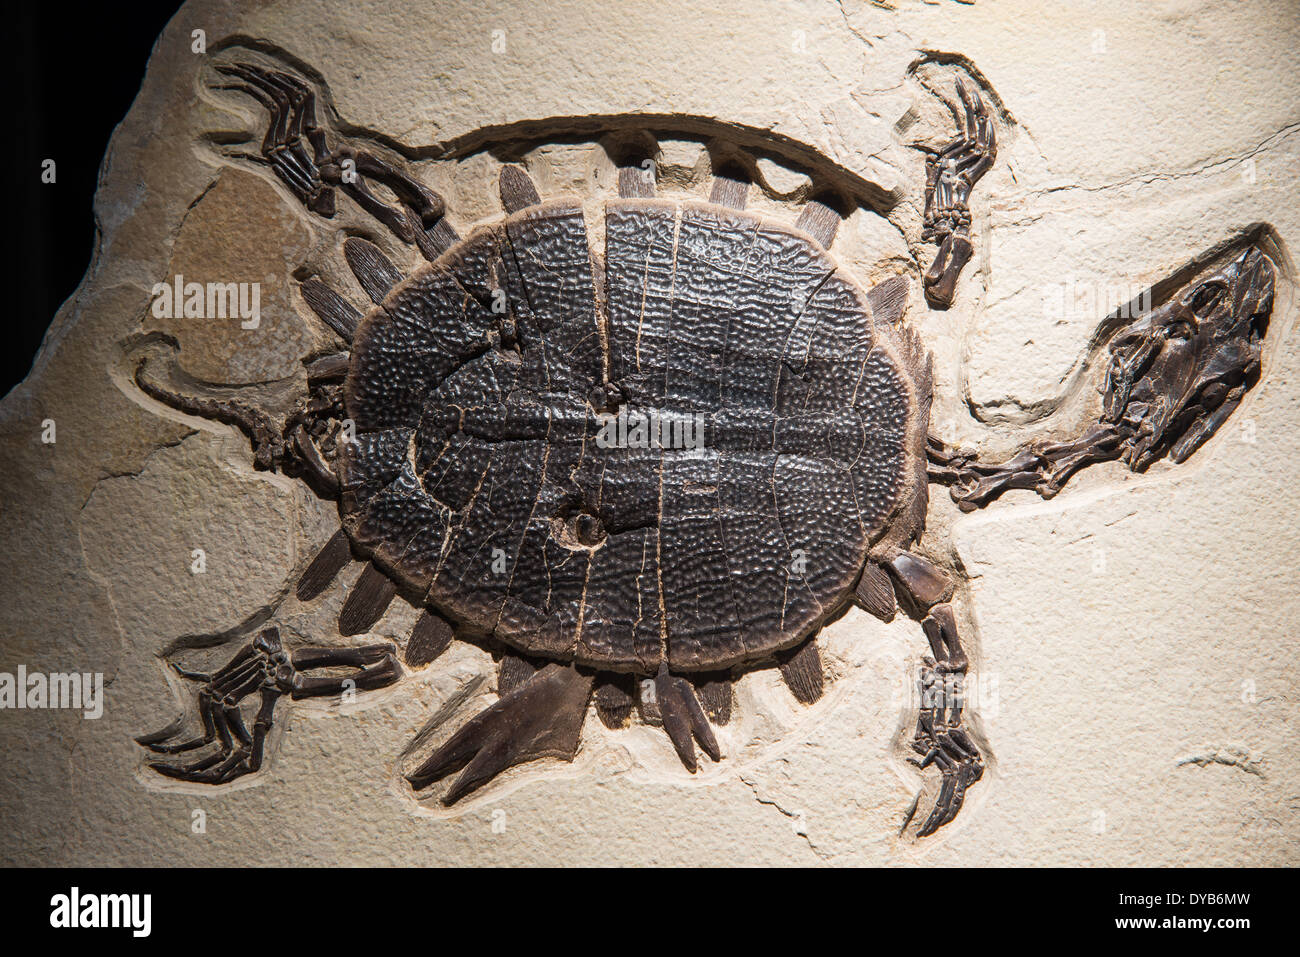 A fossilized sea-turtle with bite marks on its shell. Eocene age. Stock Photo